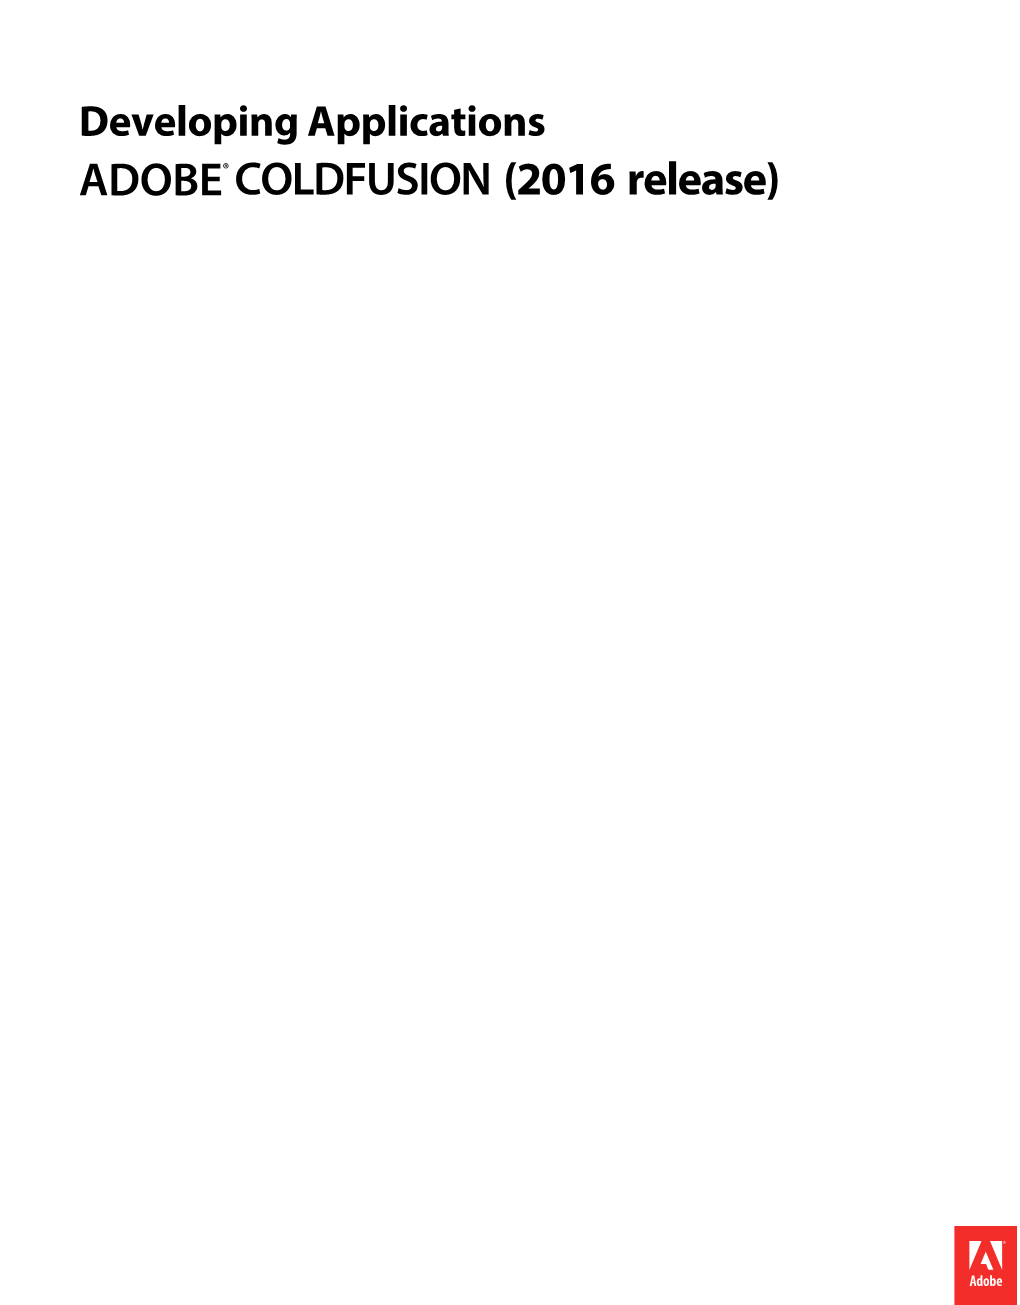 Adobe Coldfusion Documentation for Developers